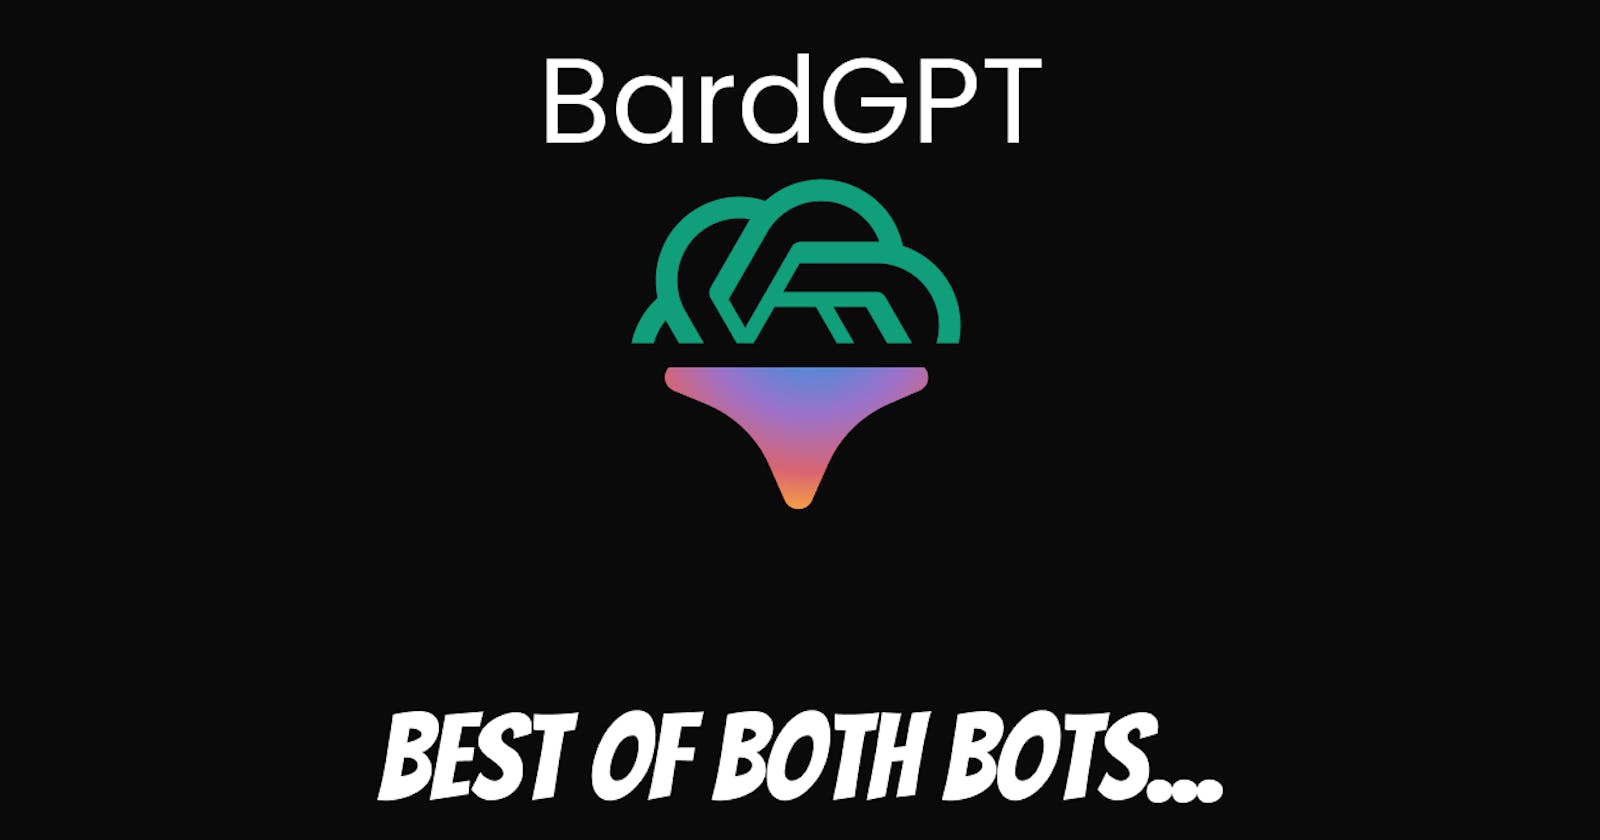 Introducing BardGPT- The best of both Bots